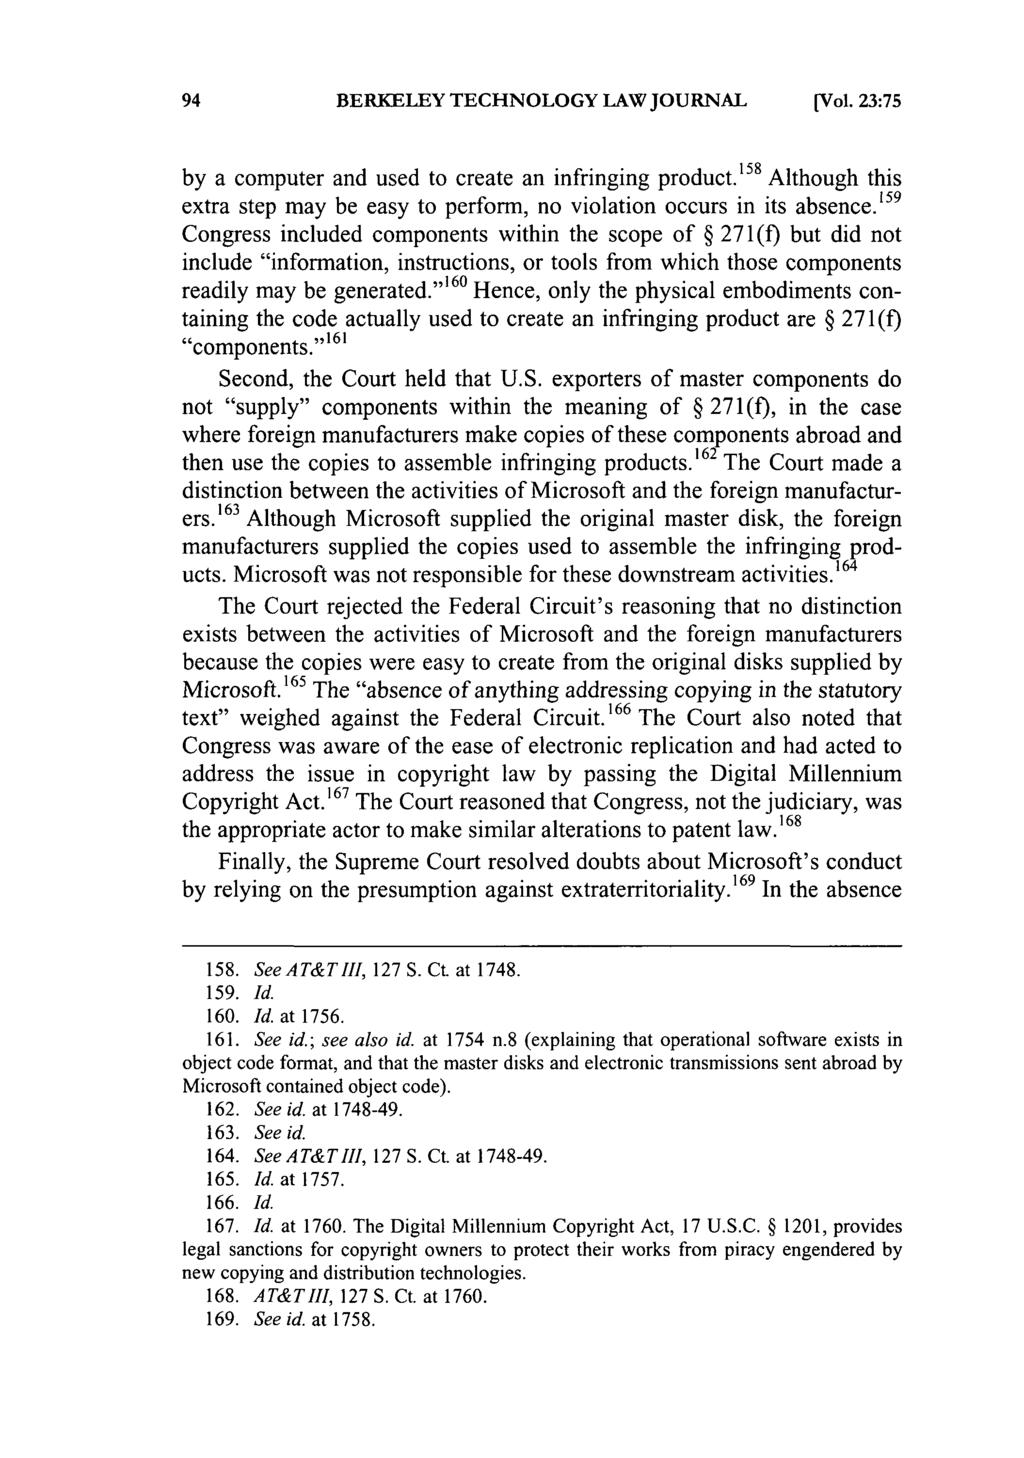 BERKELEY TECHNOLOGY LAW JOURNAL [Vol. 23:75 by a computer and used to create an infringing product. 158 Although this extra step may be easy to perform, no violation occurs in its absence.